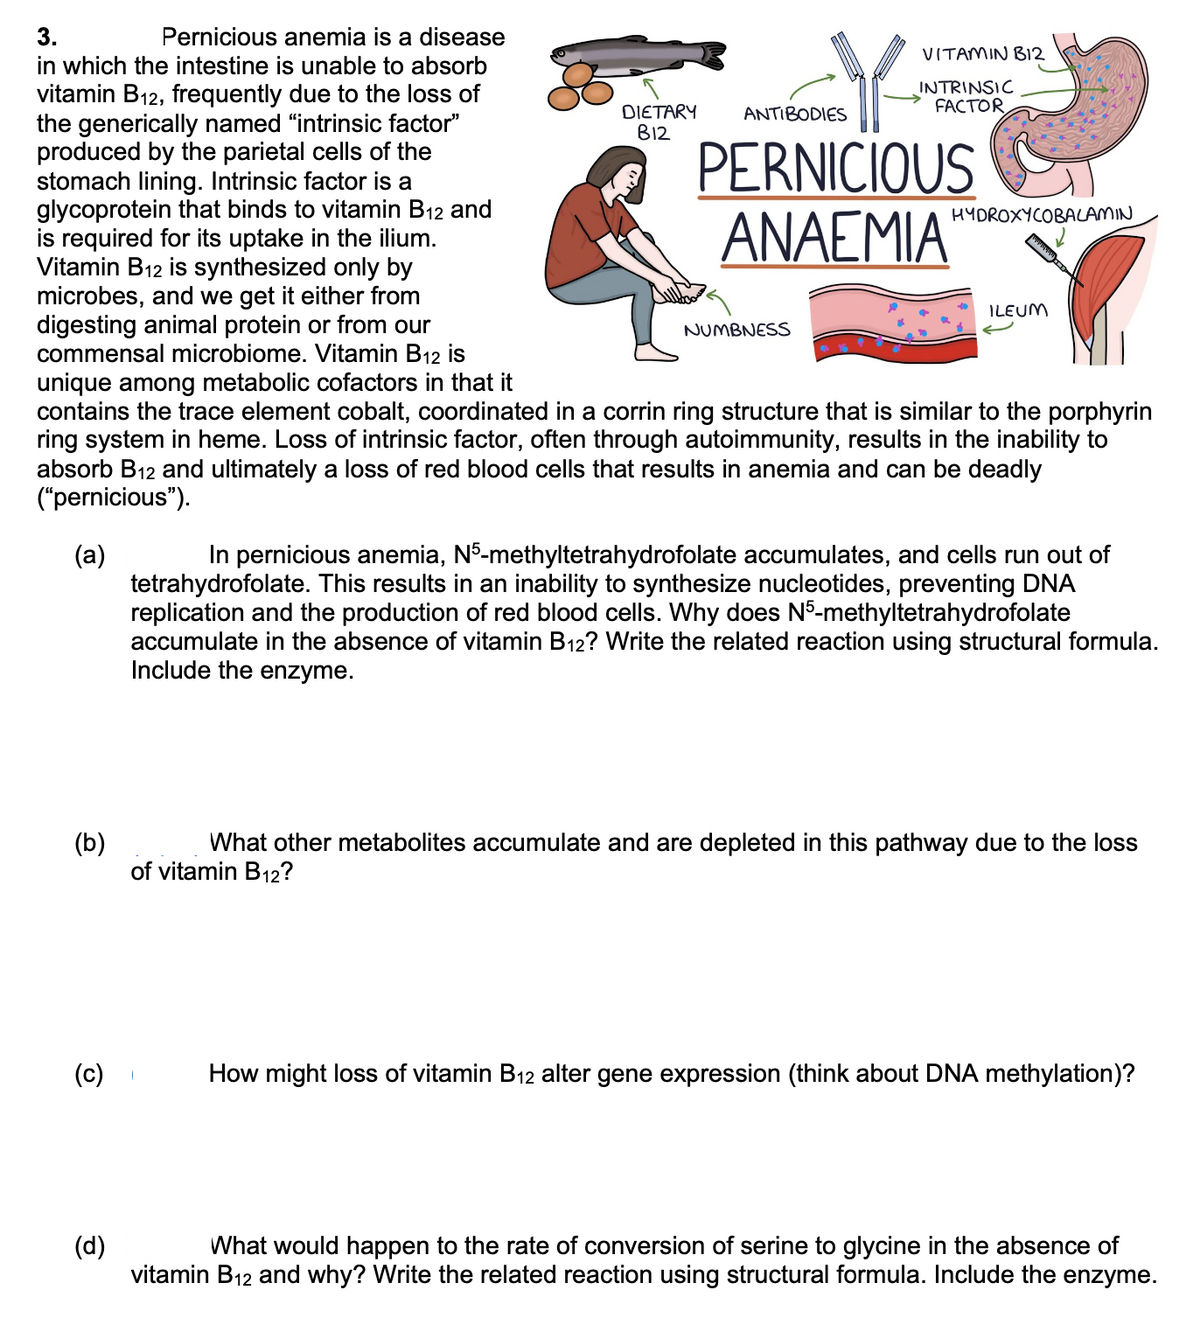 3.
Pernicious anemia is a disease
in which the intestine is unable to absorb
vitamin B₁2, frequently due to the loss of
the generically named "intrinsic factor"
produced by the parietal cells of the
stomach lining. Intrinsic factor is a
glycoprotein that binds to vitamin B12 and
is required for its uptake in the ilium.
Vitamin B12 is synthesized only by
microbes, and we get it either from
digesting animal protein or from our
commensal microbiome. Vitamin B₁2 is
DIETARY
B12
(c)
ANTIBODIES
(d)
VITAMIN B12
INTRINSIC
FACTOR
PERNICIOUS
ANAEMIA'
NUMBNESS
HYDROXYCOBALAMIN
bbbbaddal
unique among metabolic cofactors in that it
contains the trace element cobalt, coordinated in a corrin ring structure that is similar to the porphyrin
ring system in heme. Loss of intrinsic factor, often through autoimmunity, results in the inability to
absorb B₁2 and ultimately a loss of red blood cells that results in anemia and can be deadly
("pernicious").
(a)
ILEUM
(b)
What other metabolites accumulate and are depleted in this pathway due to the loss
of vitamin B12?
In pernicious anemia, N5-methyltetrahydrofolate accumulates, and cells run out of
tetrahydrofolate. This results in an inability to synthesize nucleotides, preventing DNA
replication and the production of red blood cells. Why does N5-methyltetrahydrofolate
accumulate in the absence of vitamin B₁2? Write the related reaction using structural formula.
Include the enzyme.
How might loss of vitamin B₁2 alter gene expression (think about DNA methylation)?
What would happen to the rate of conversion of serine to glycine in the absence of
vitamin B₁2 and why? Write the related reaction using structural formula. Include the enzyme.